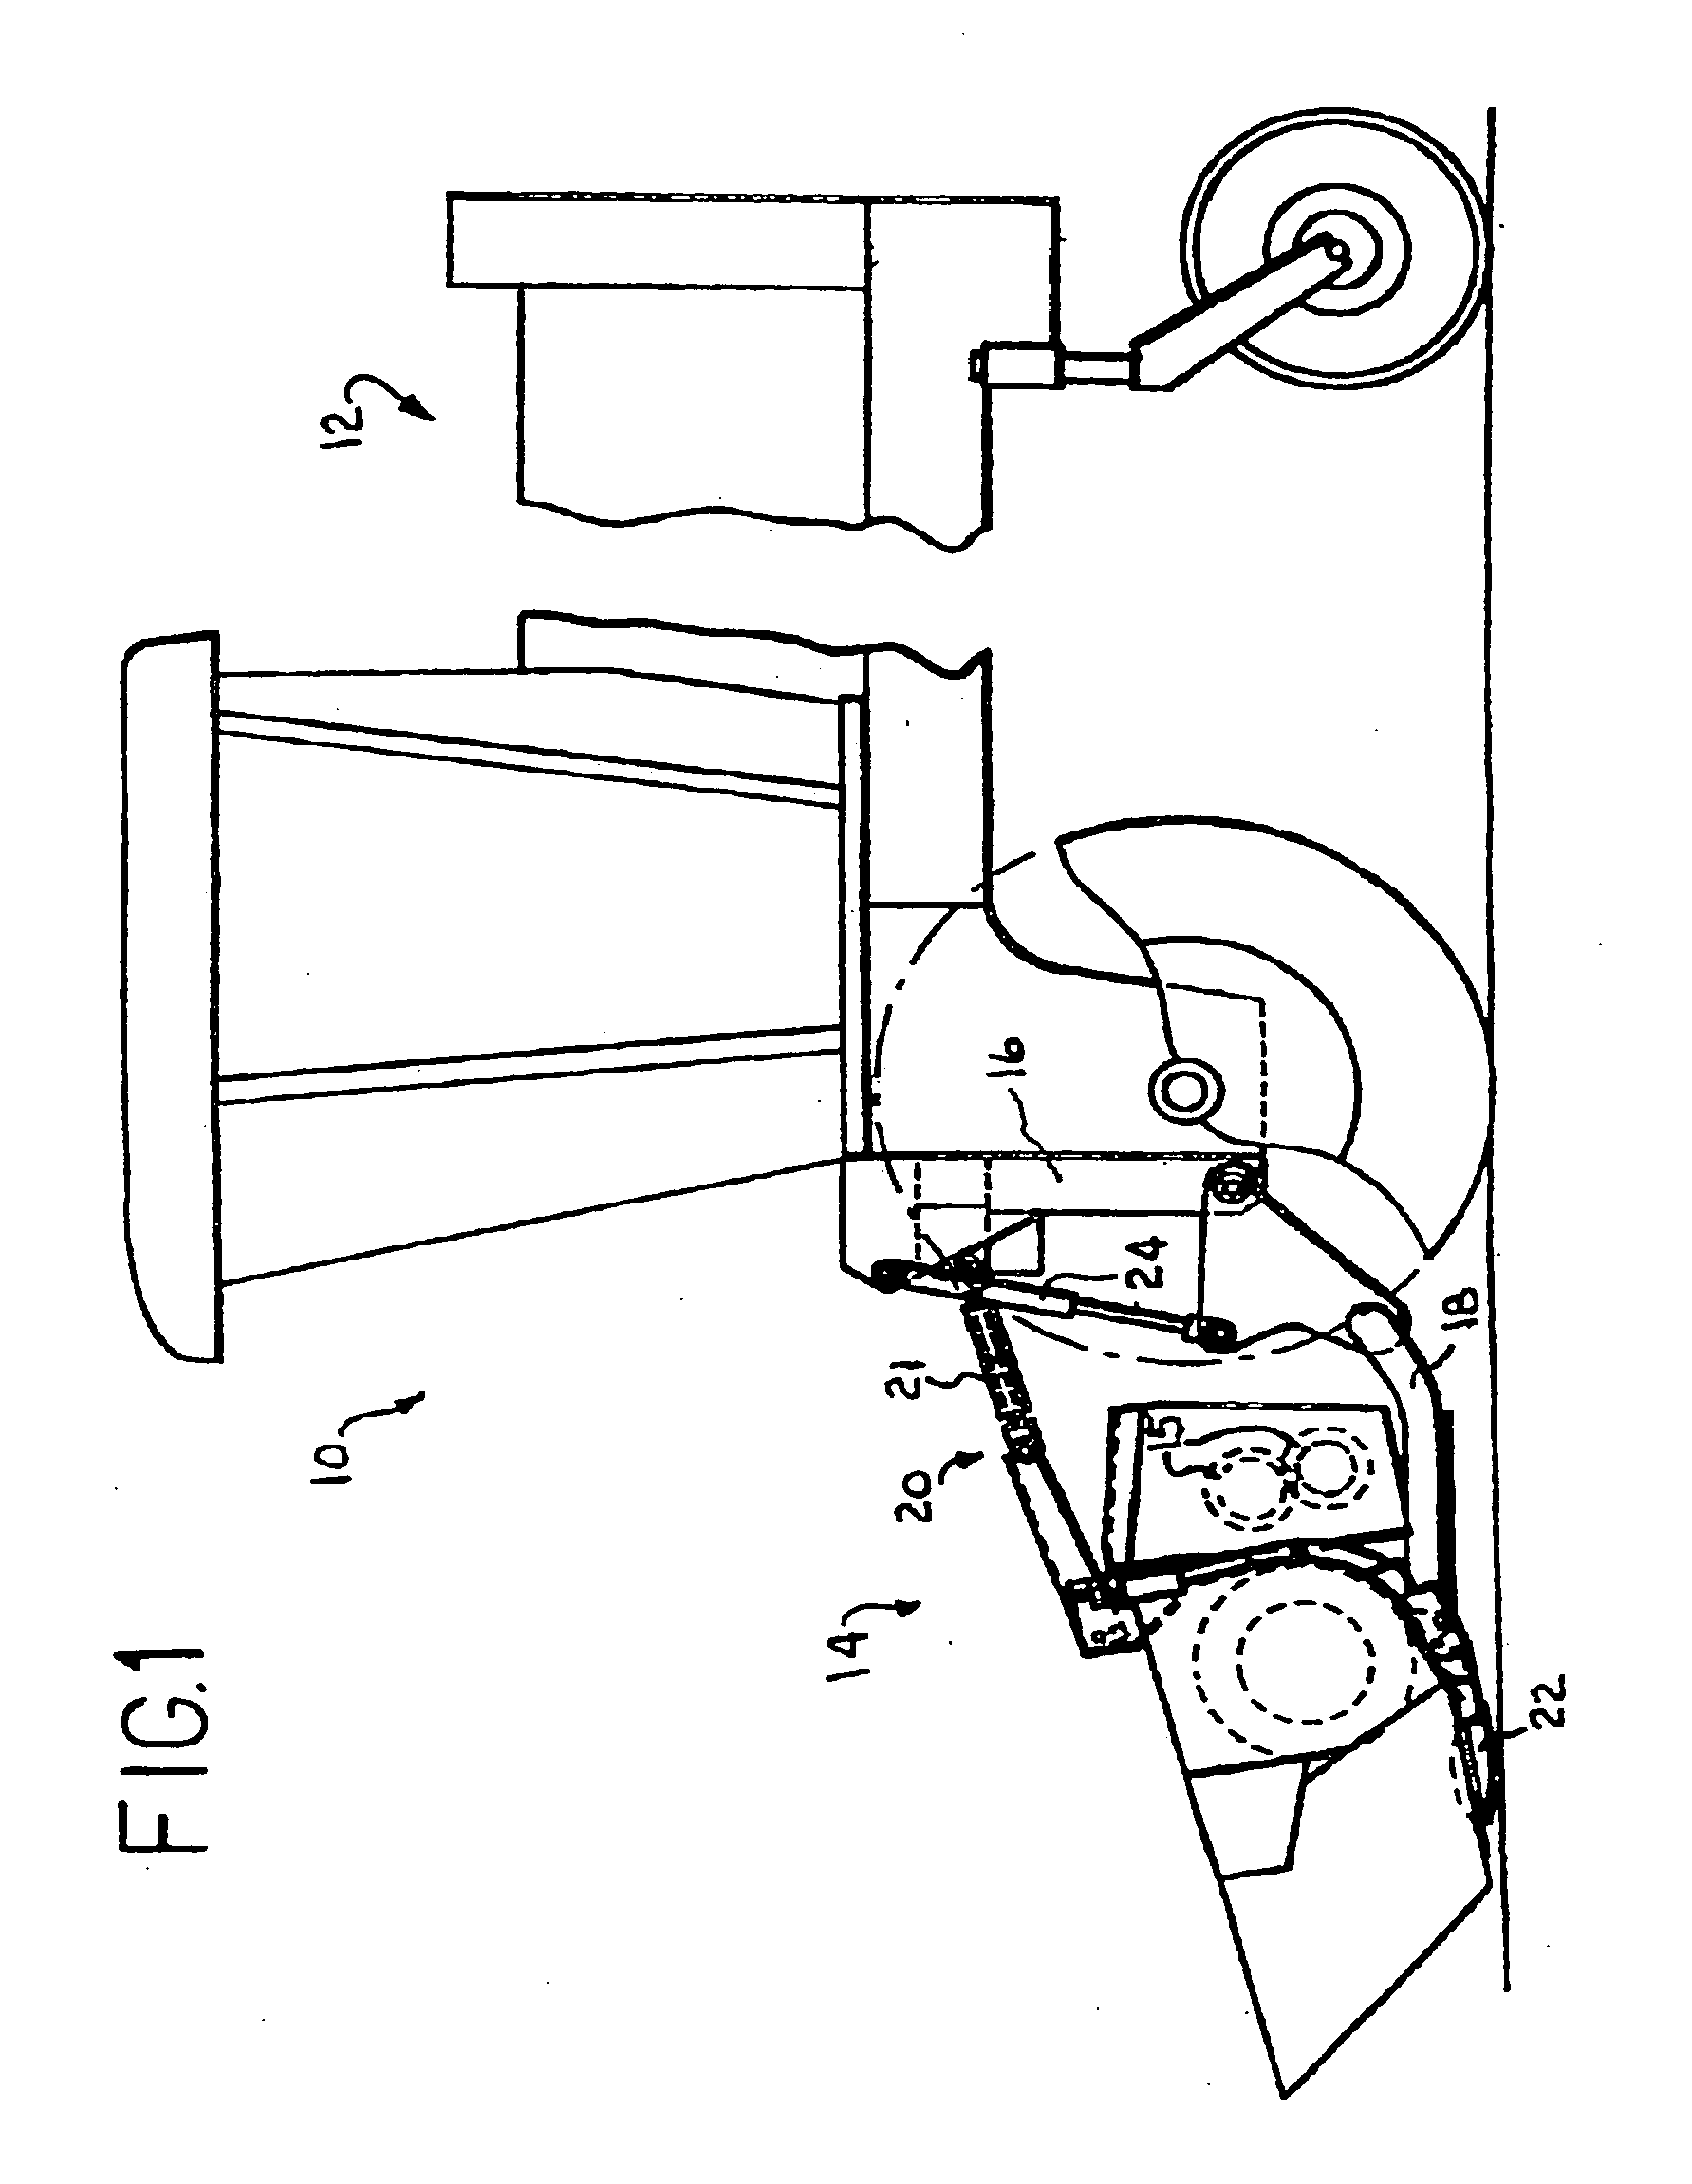 System and Method for Managing the Electrical Control System of a Windrower Header Flotation and Lift System